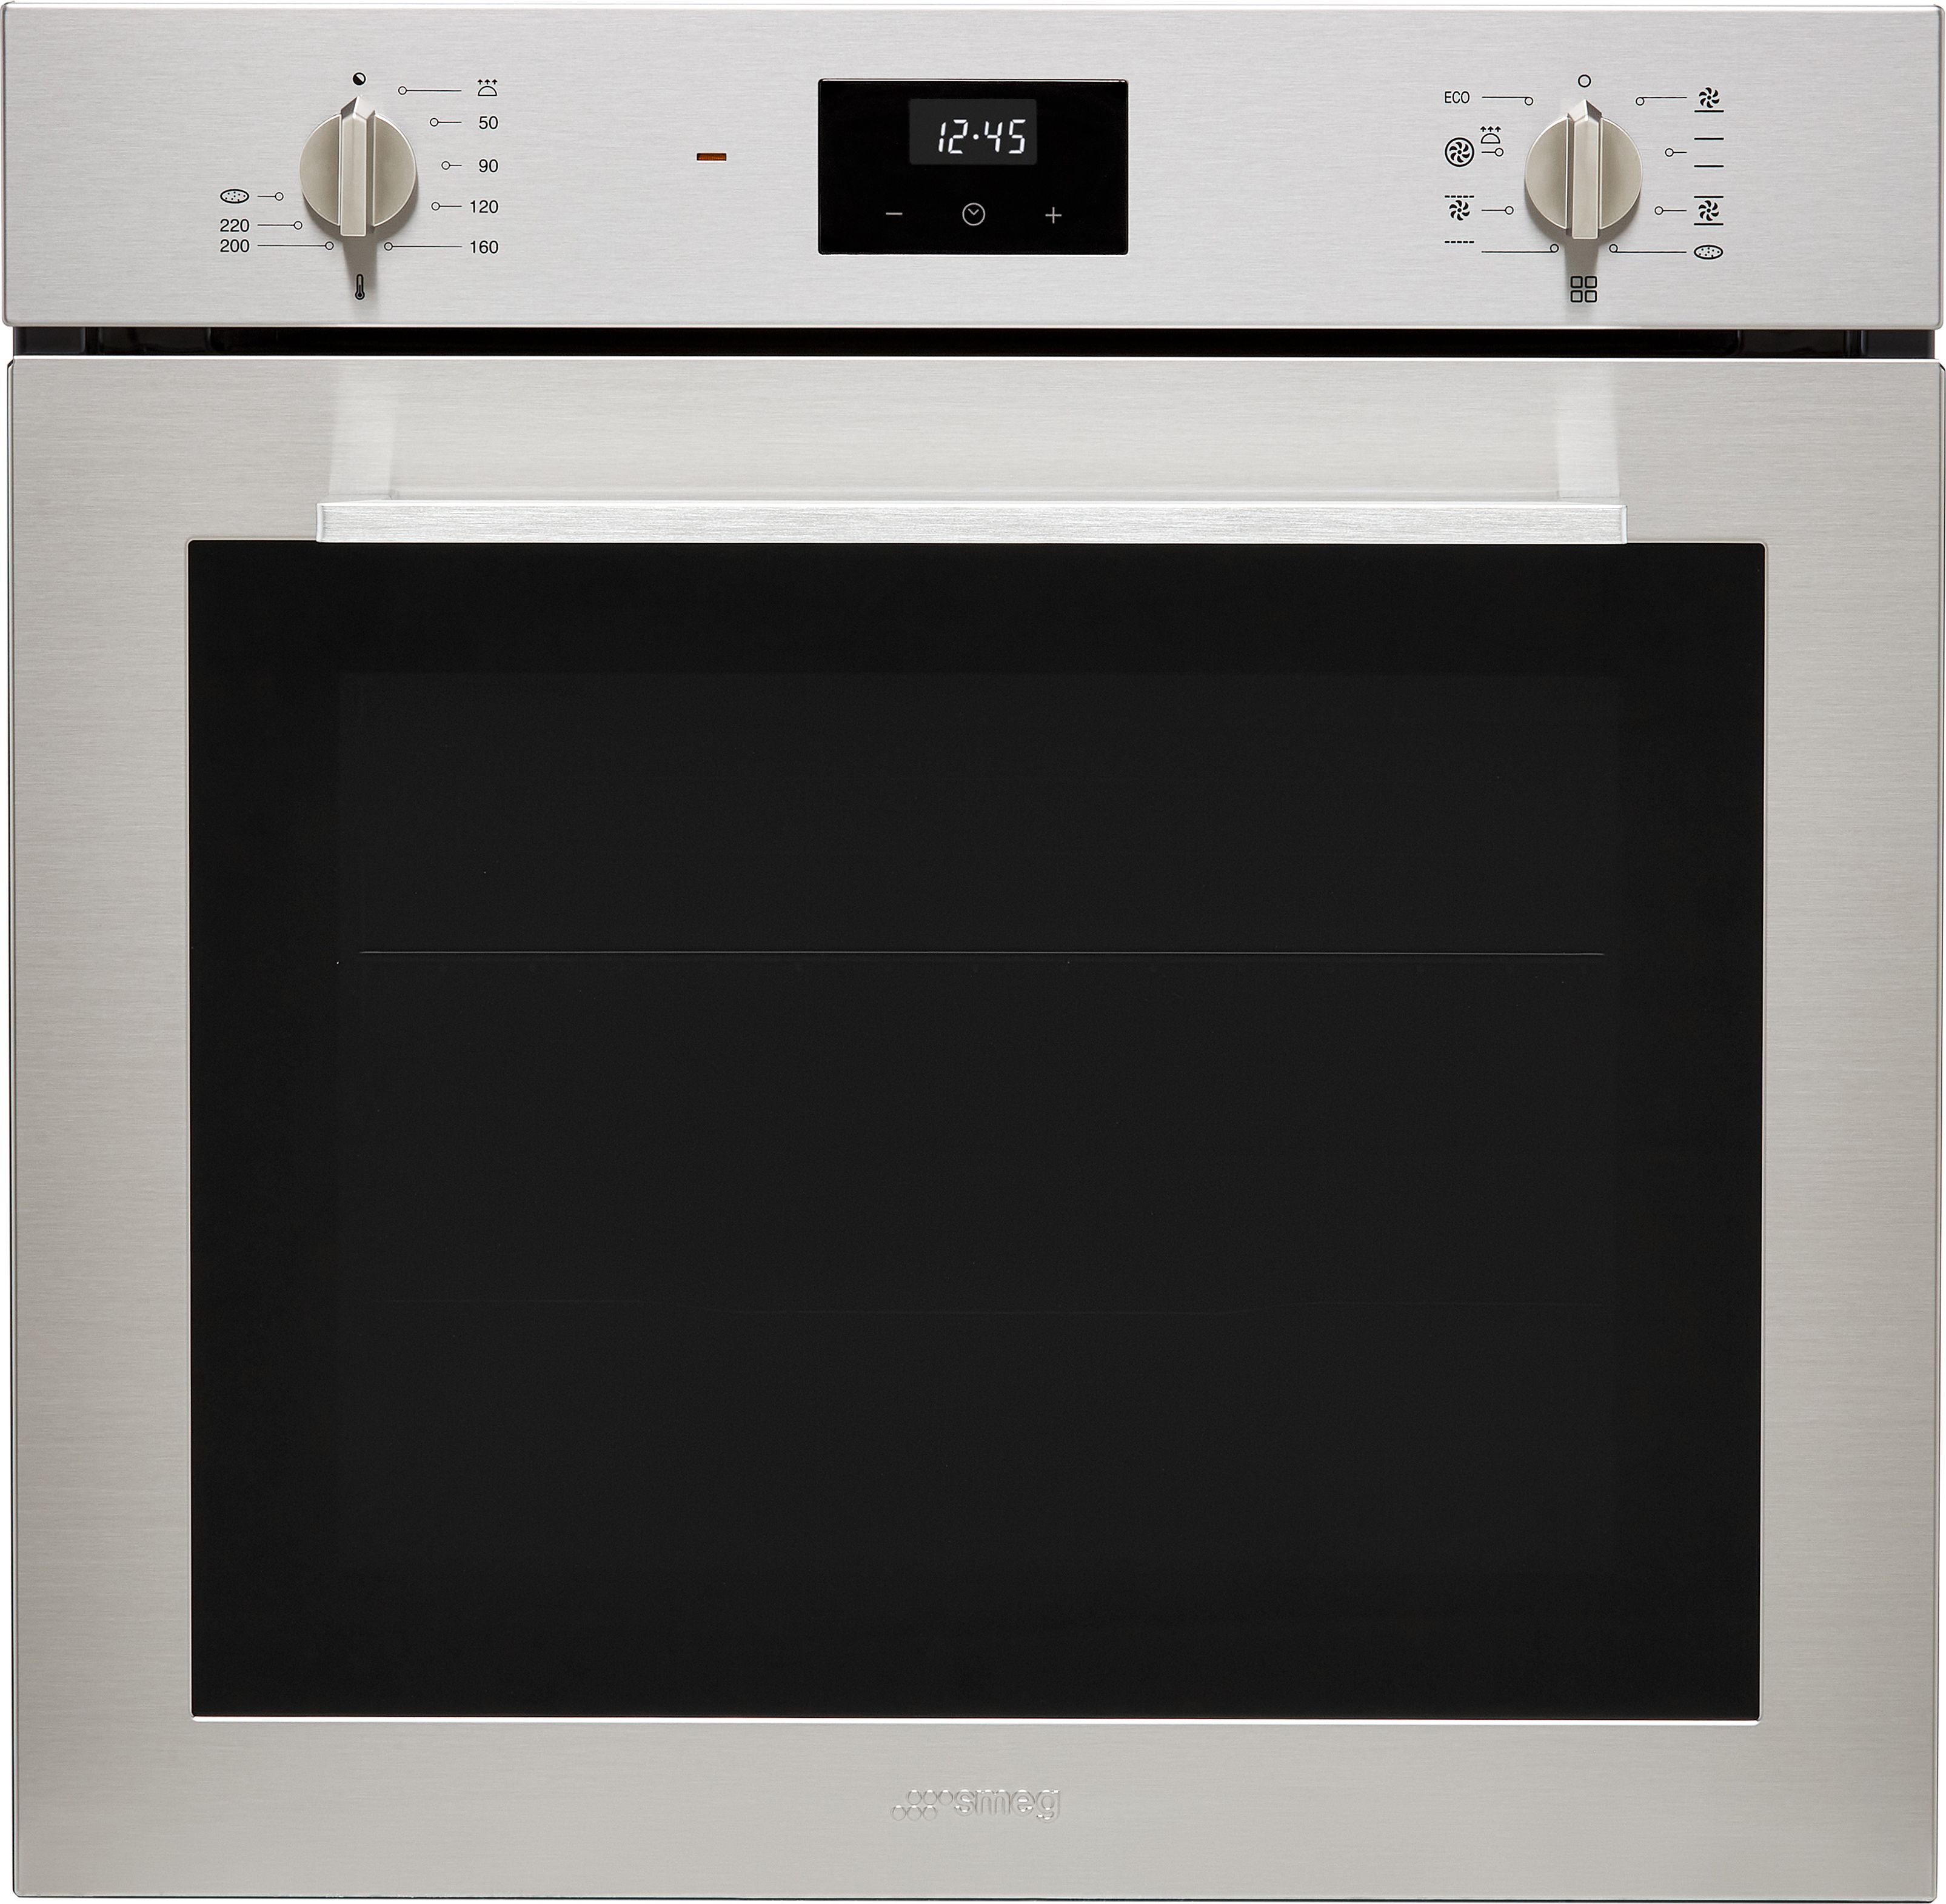 Smeg Cucina SF6400PZX Built In Electric Single Oven - Stainless Steel - A Rated, Stainless Steel